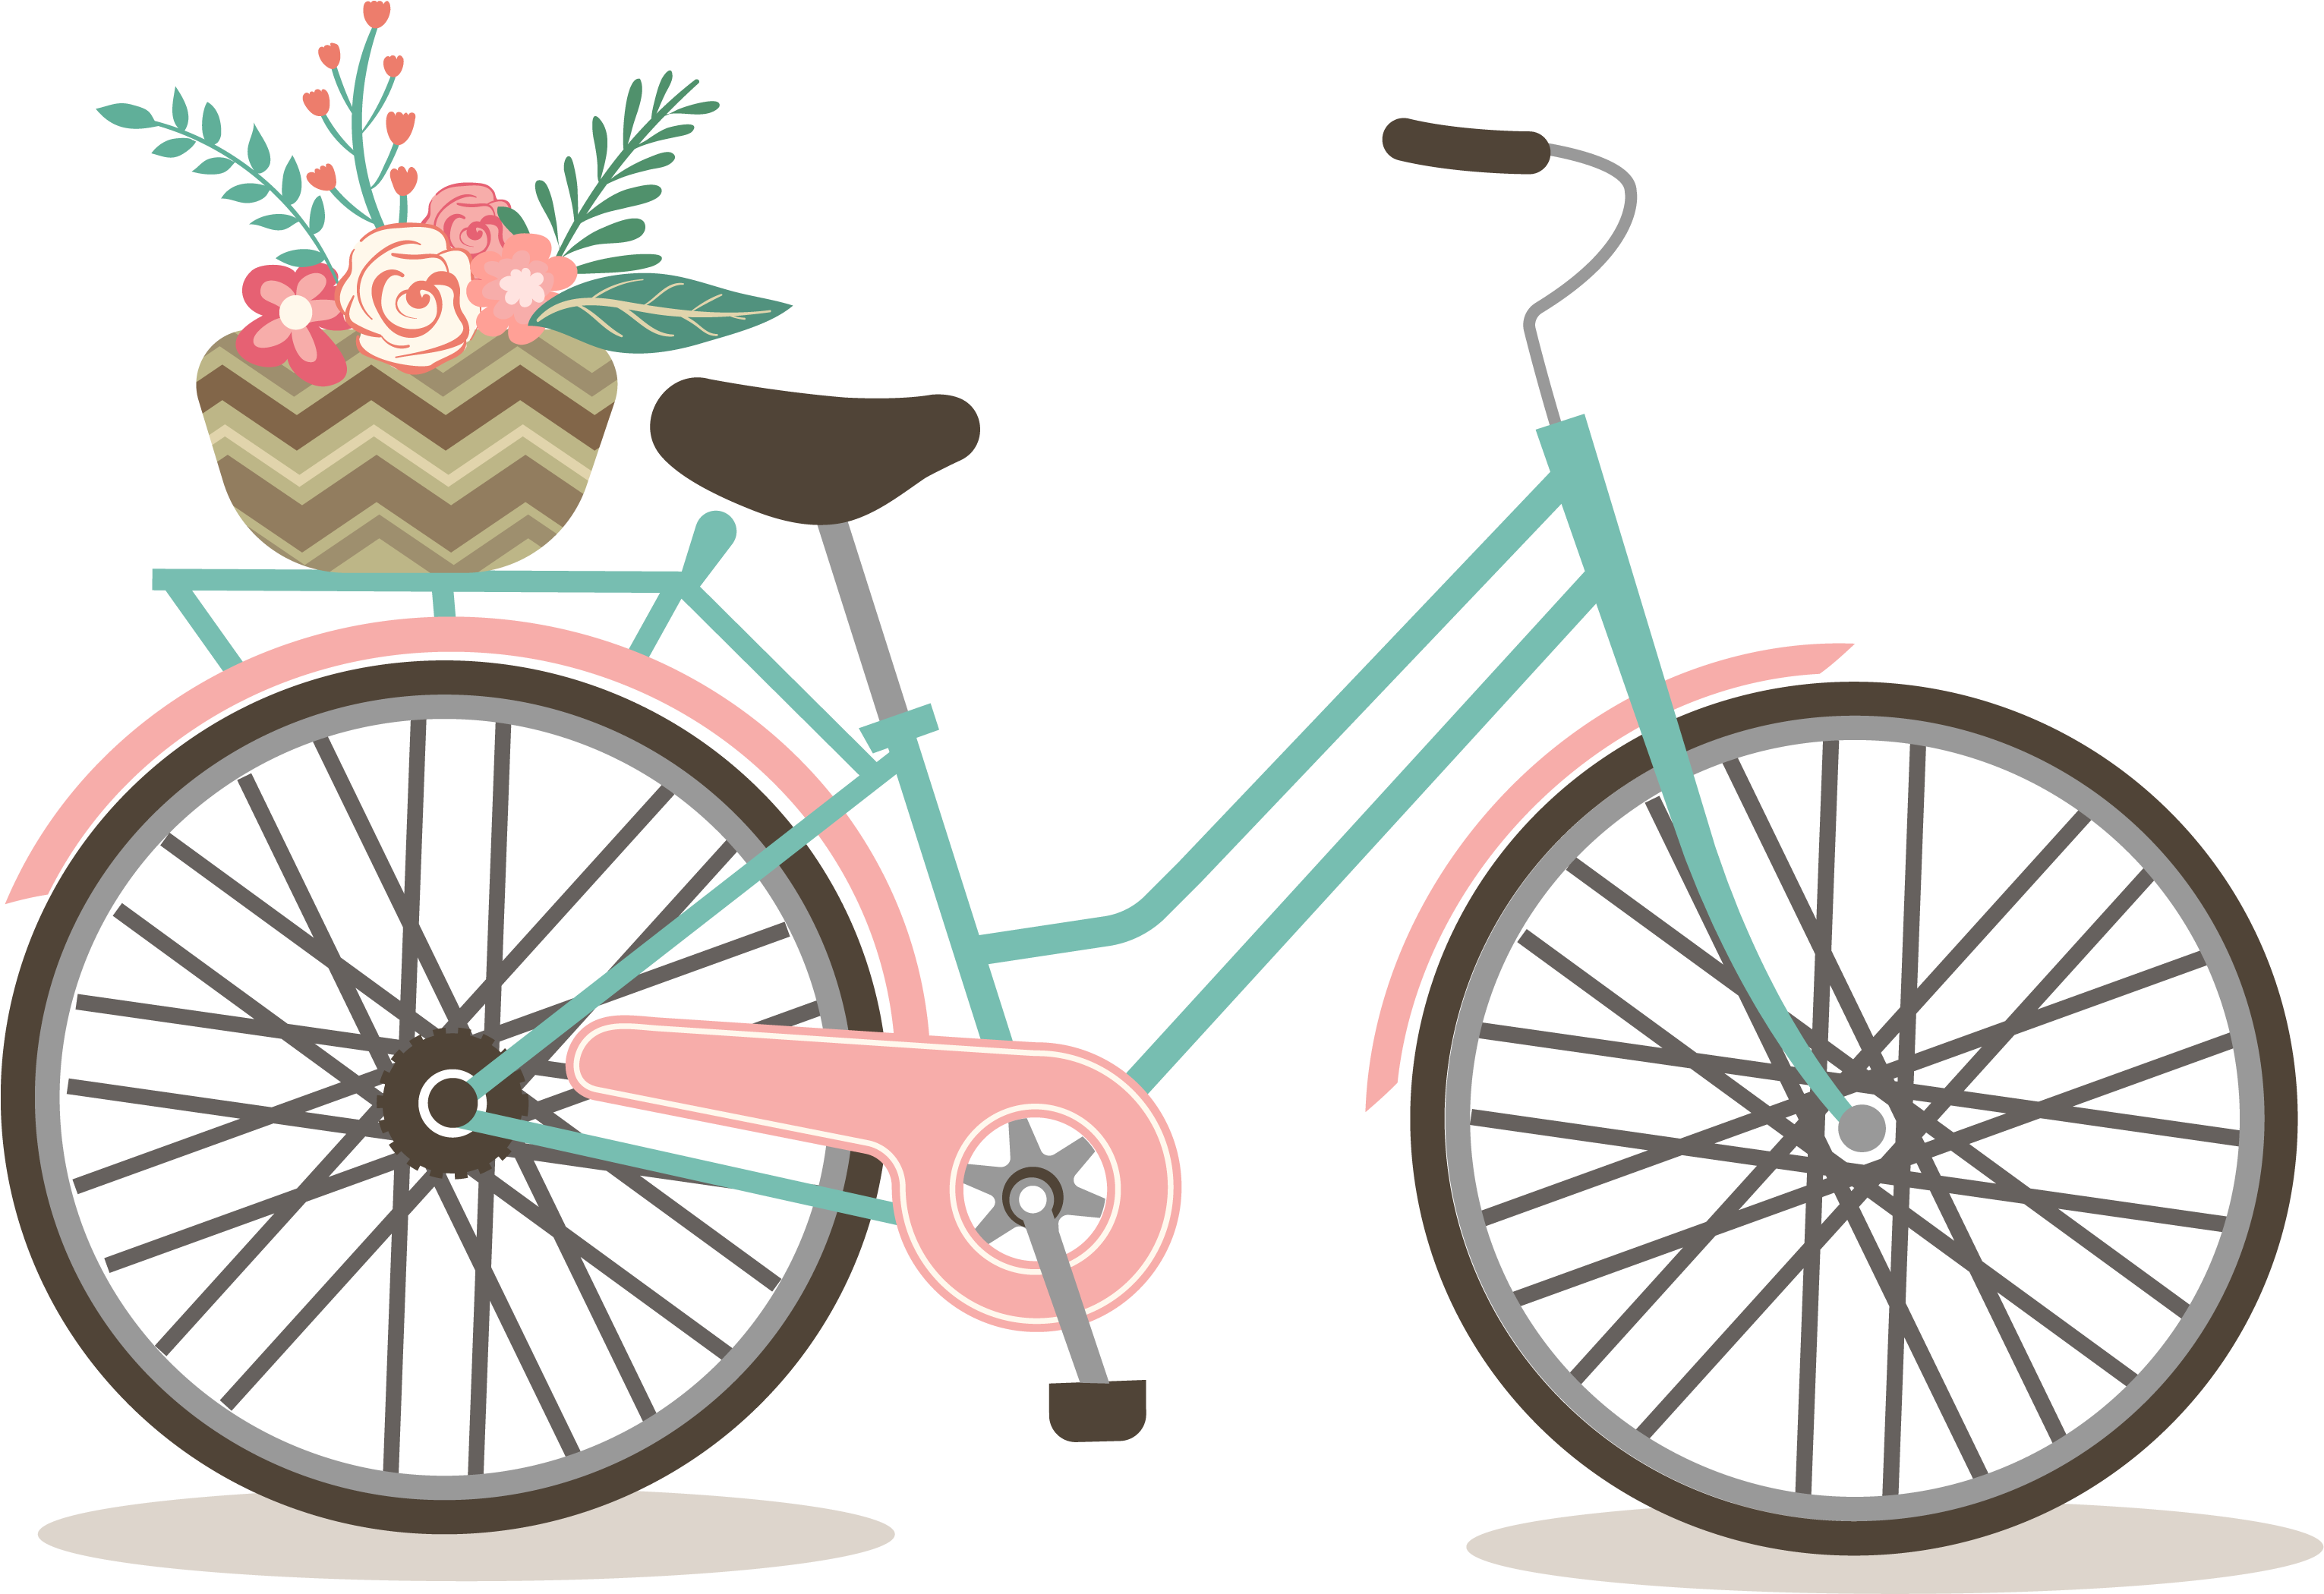 A Bicycle With A Basket Of Flowers On The Back